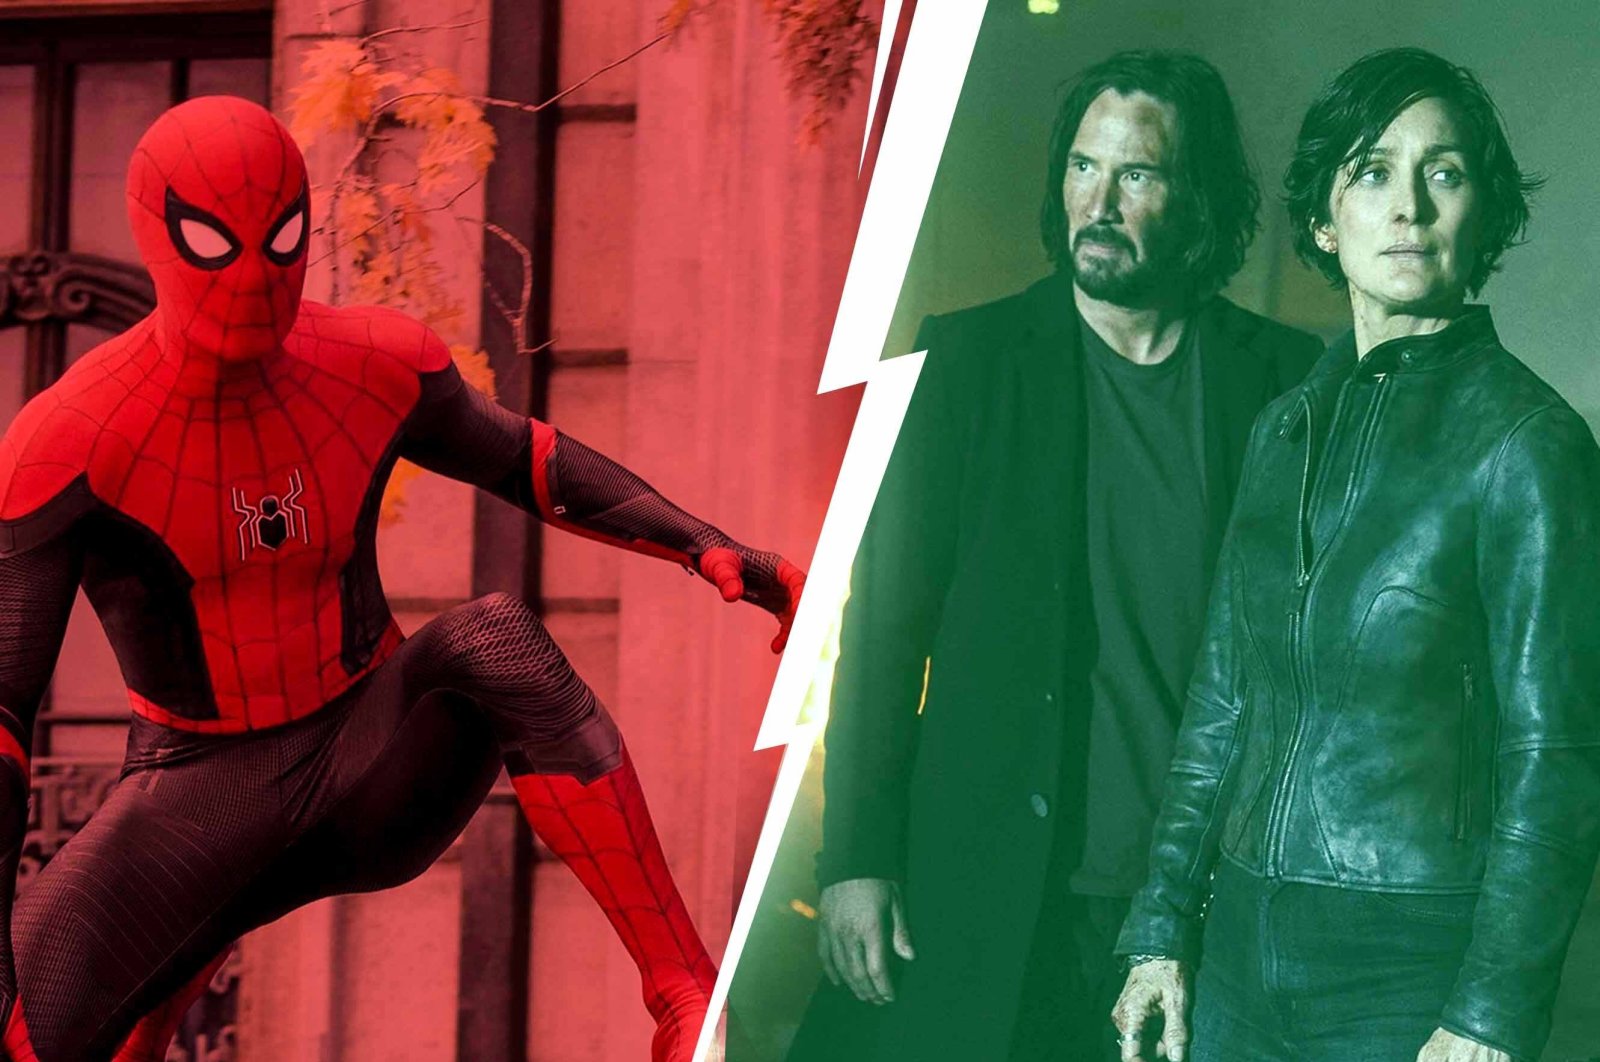 Tom Holland (L) in the film &quot;Spider-Man: No Way Home&quot; on the left, Keanu Reeves (L) and Carrie-Anne Moss in the film &quot;The Matrix Resurrections&quot; on the right. (Photos edited by Büşra Öztürk)